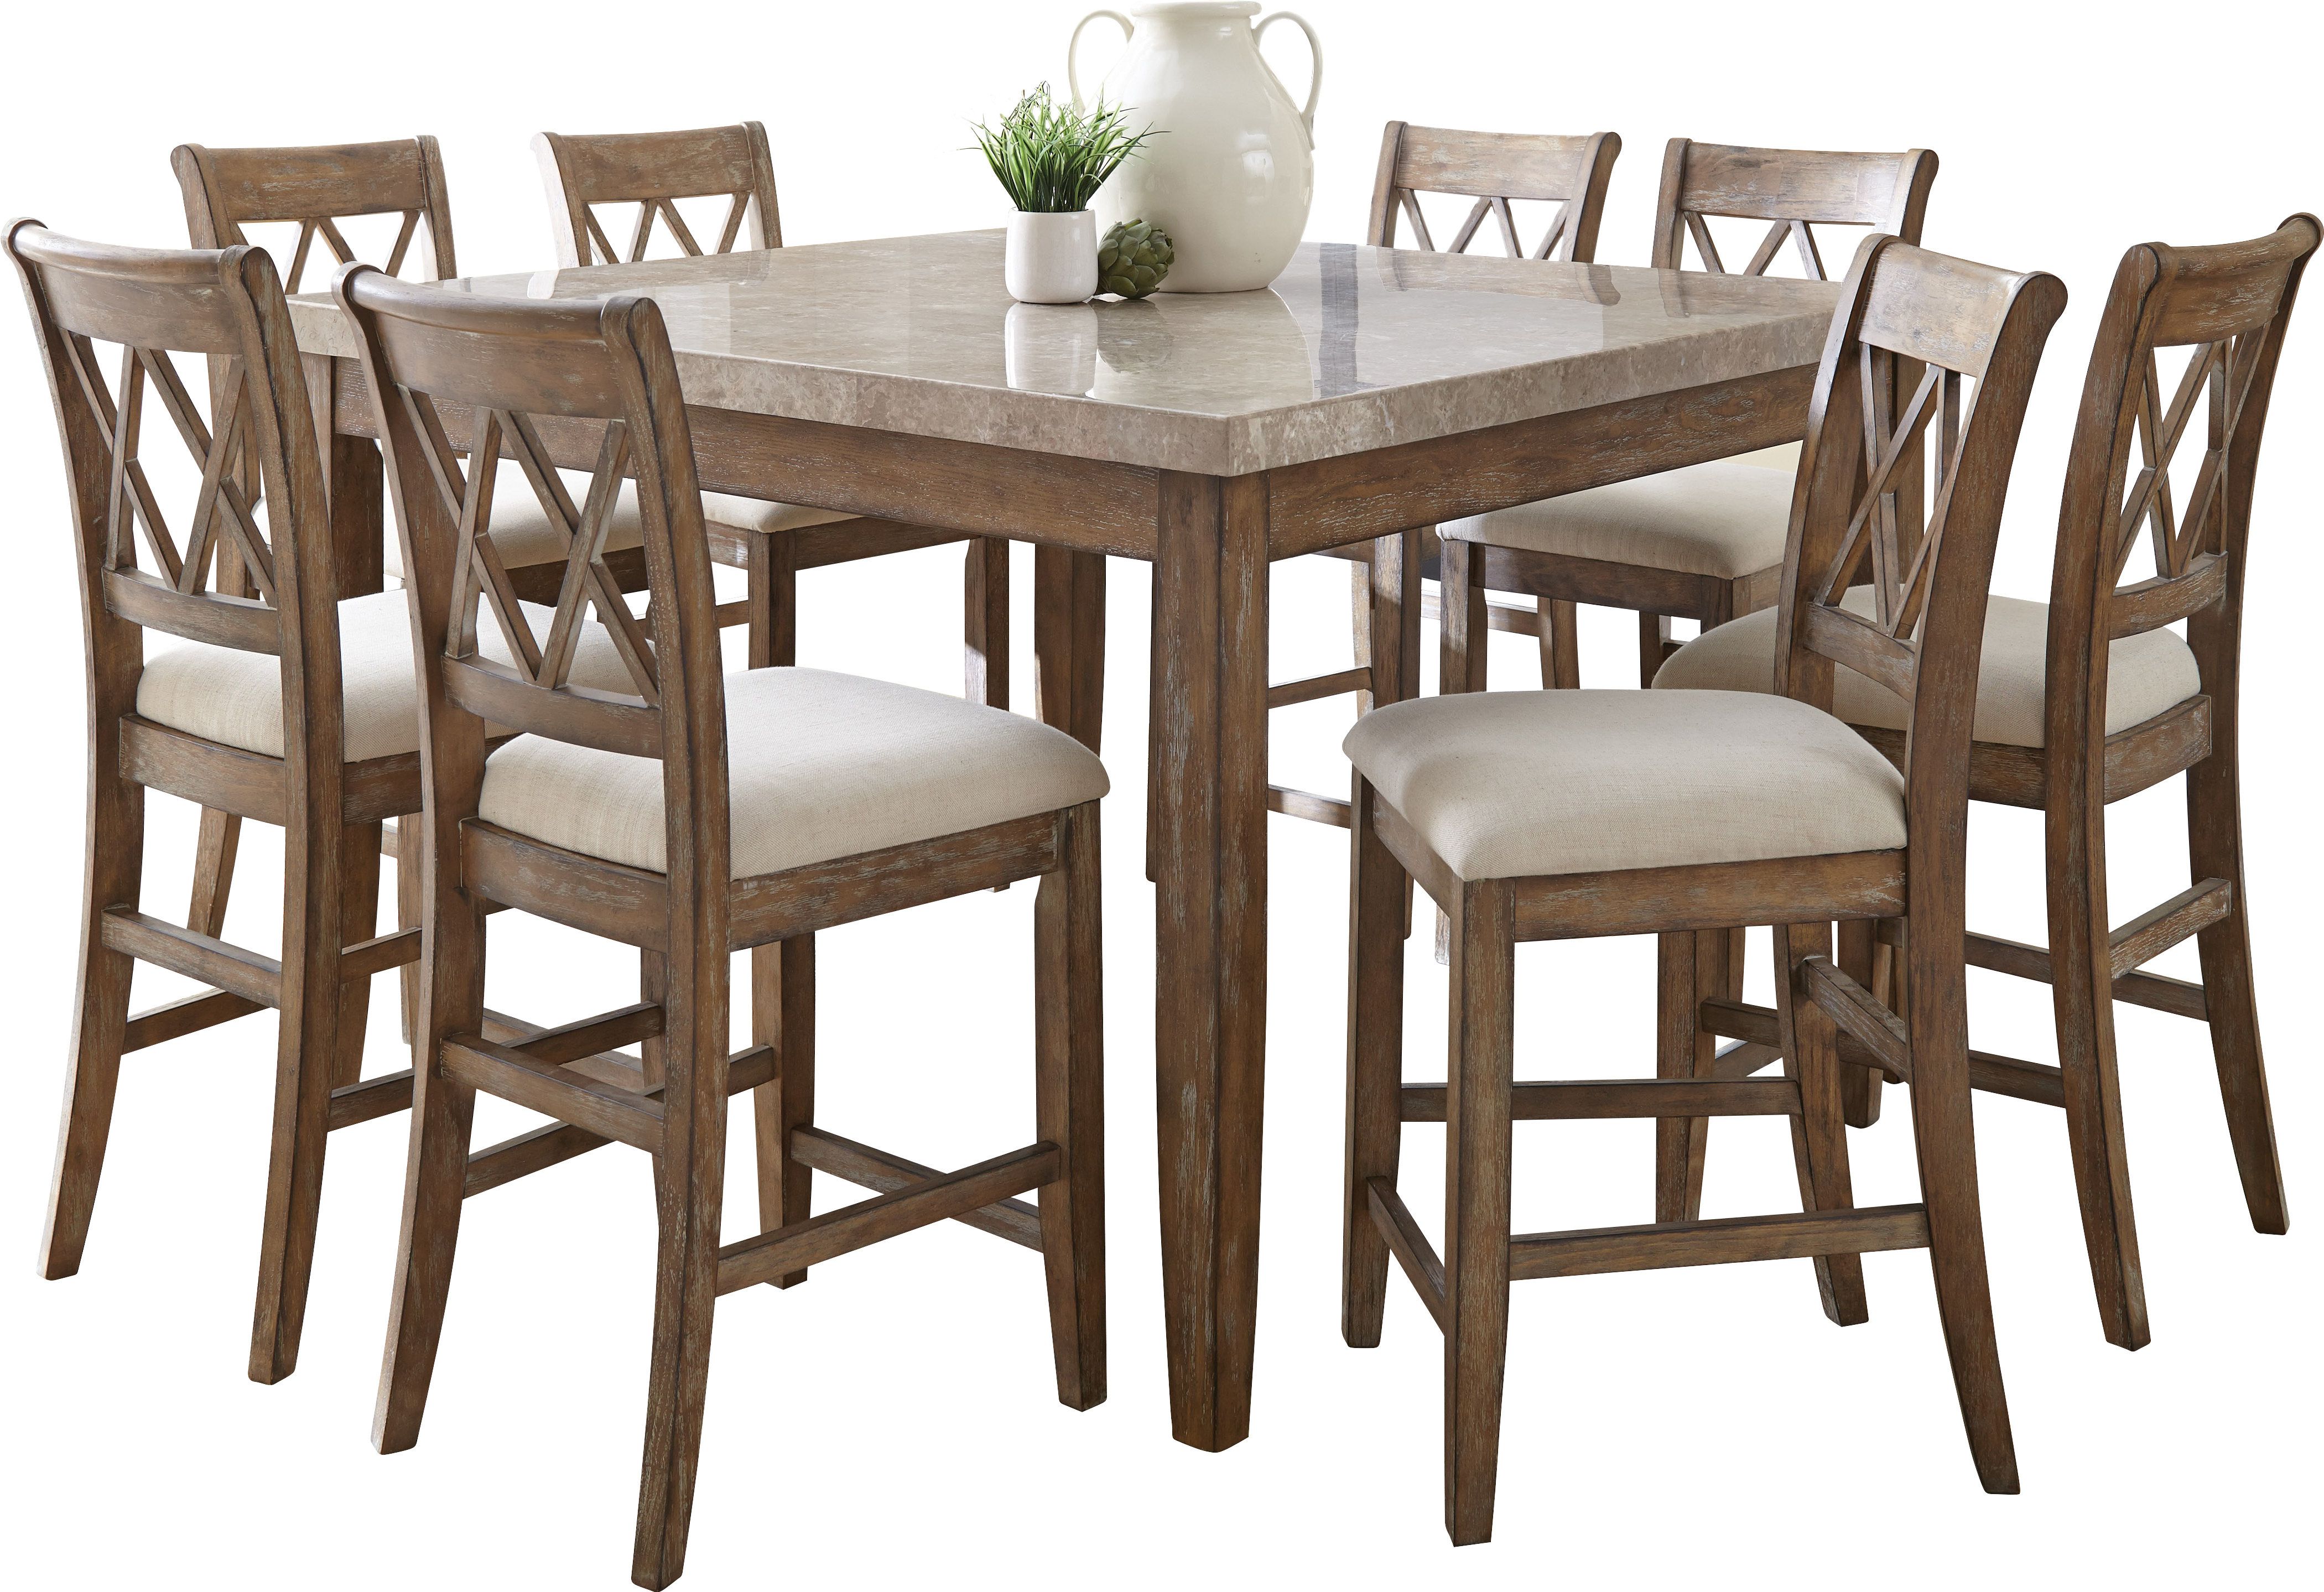 Three Posts Clearmont 9 Piece Dining Set With Regard To Most Current Baxton Studio Keitaro 5 Piece Dining Sets (View 19 of 20)